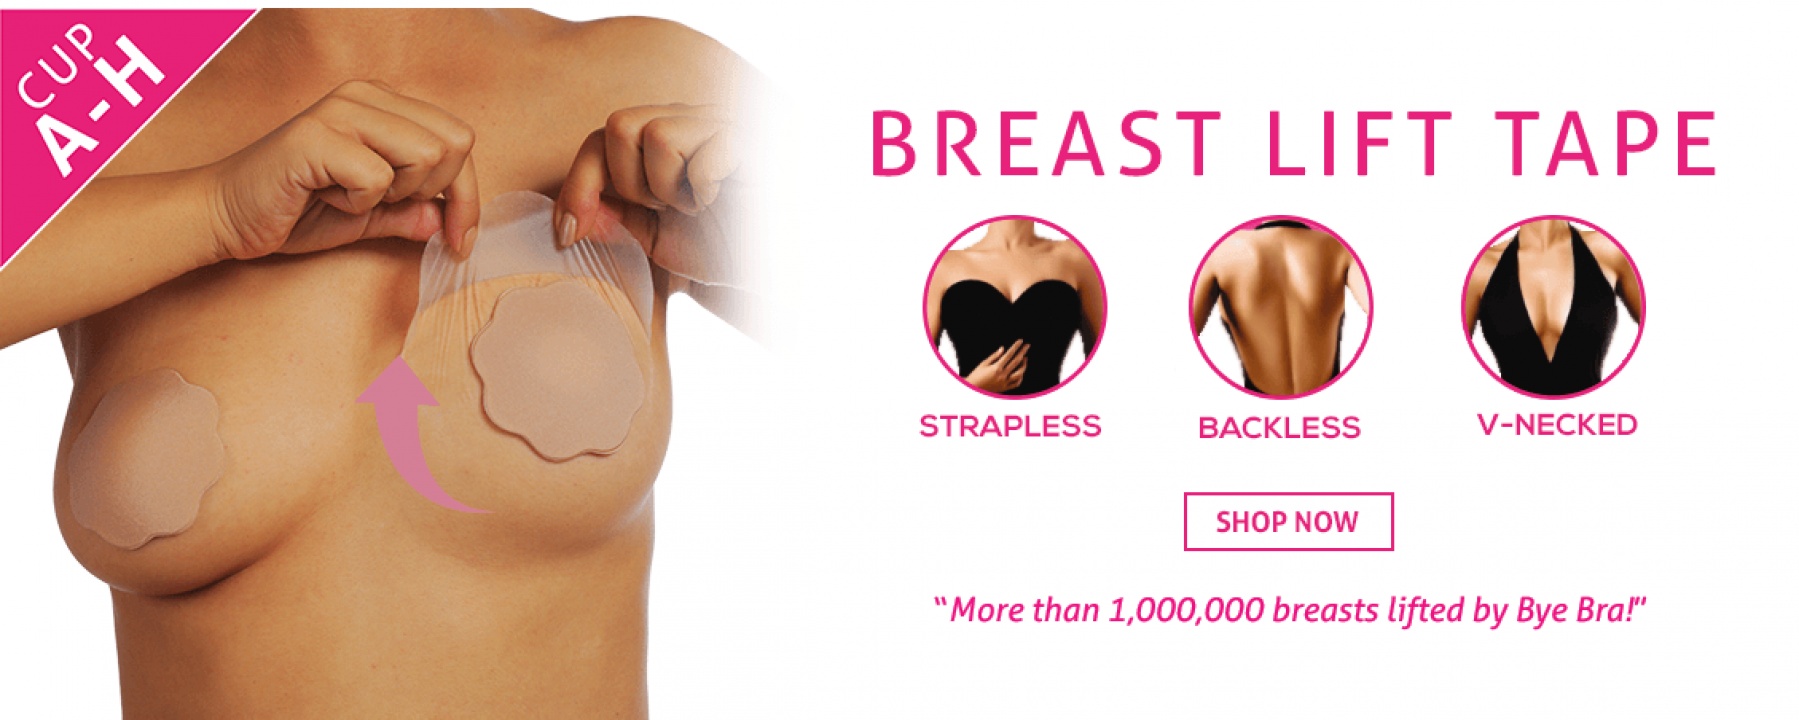 https://byebrablog.files.wordpress.com/2016/03/cropped-adhesive-breast-lift-tapes.png